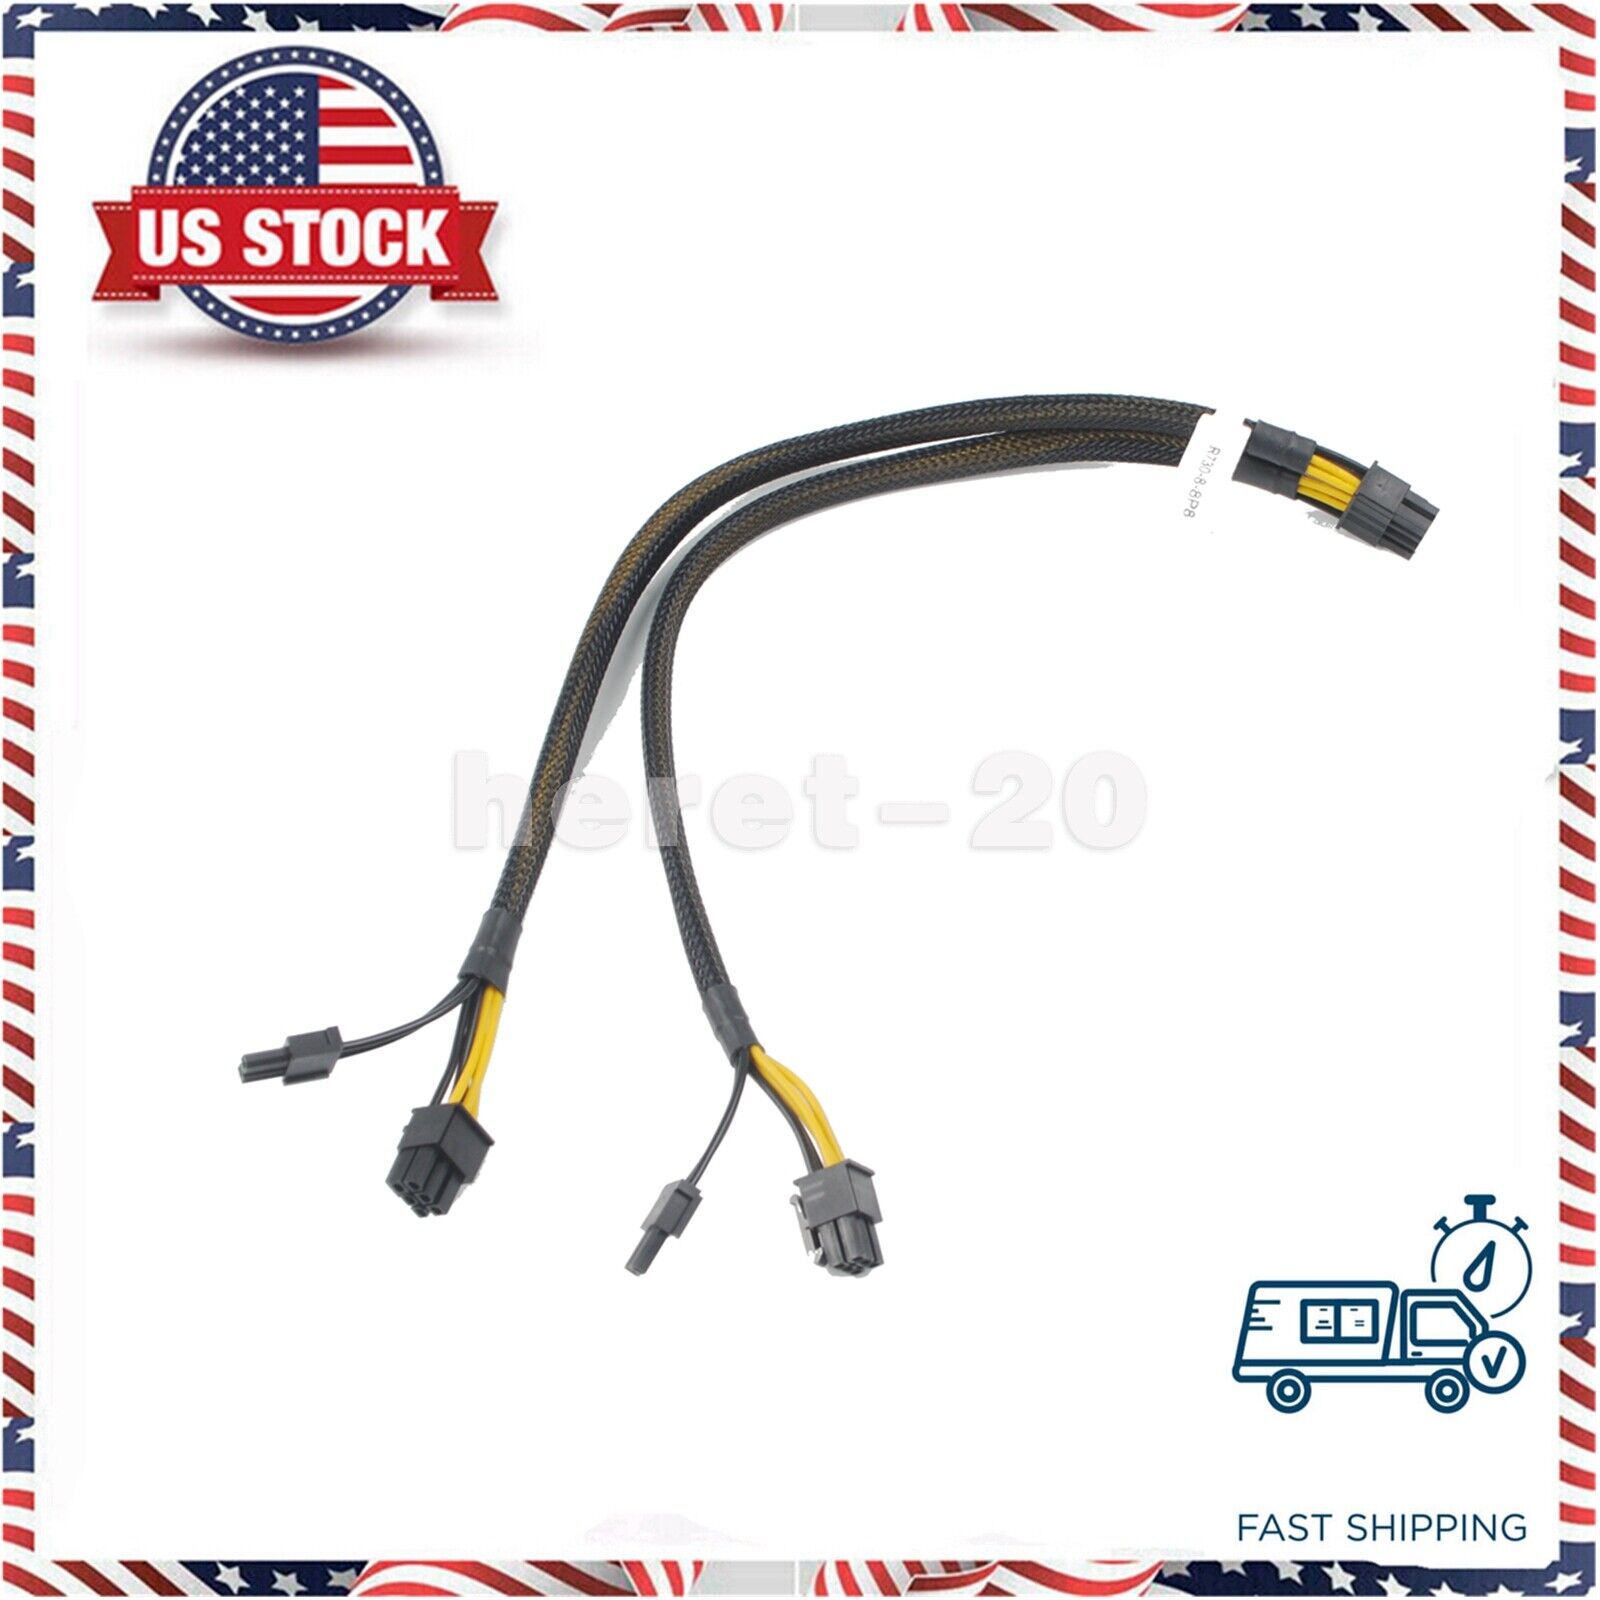 PCI-E 8pin to Dual 8pin(6+2) For DELL R720 R730 GPU Video Card Power Cable 35cm